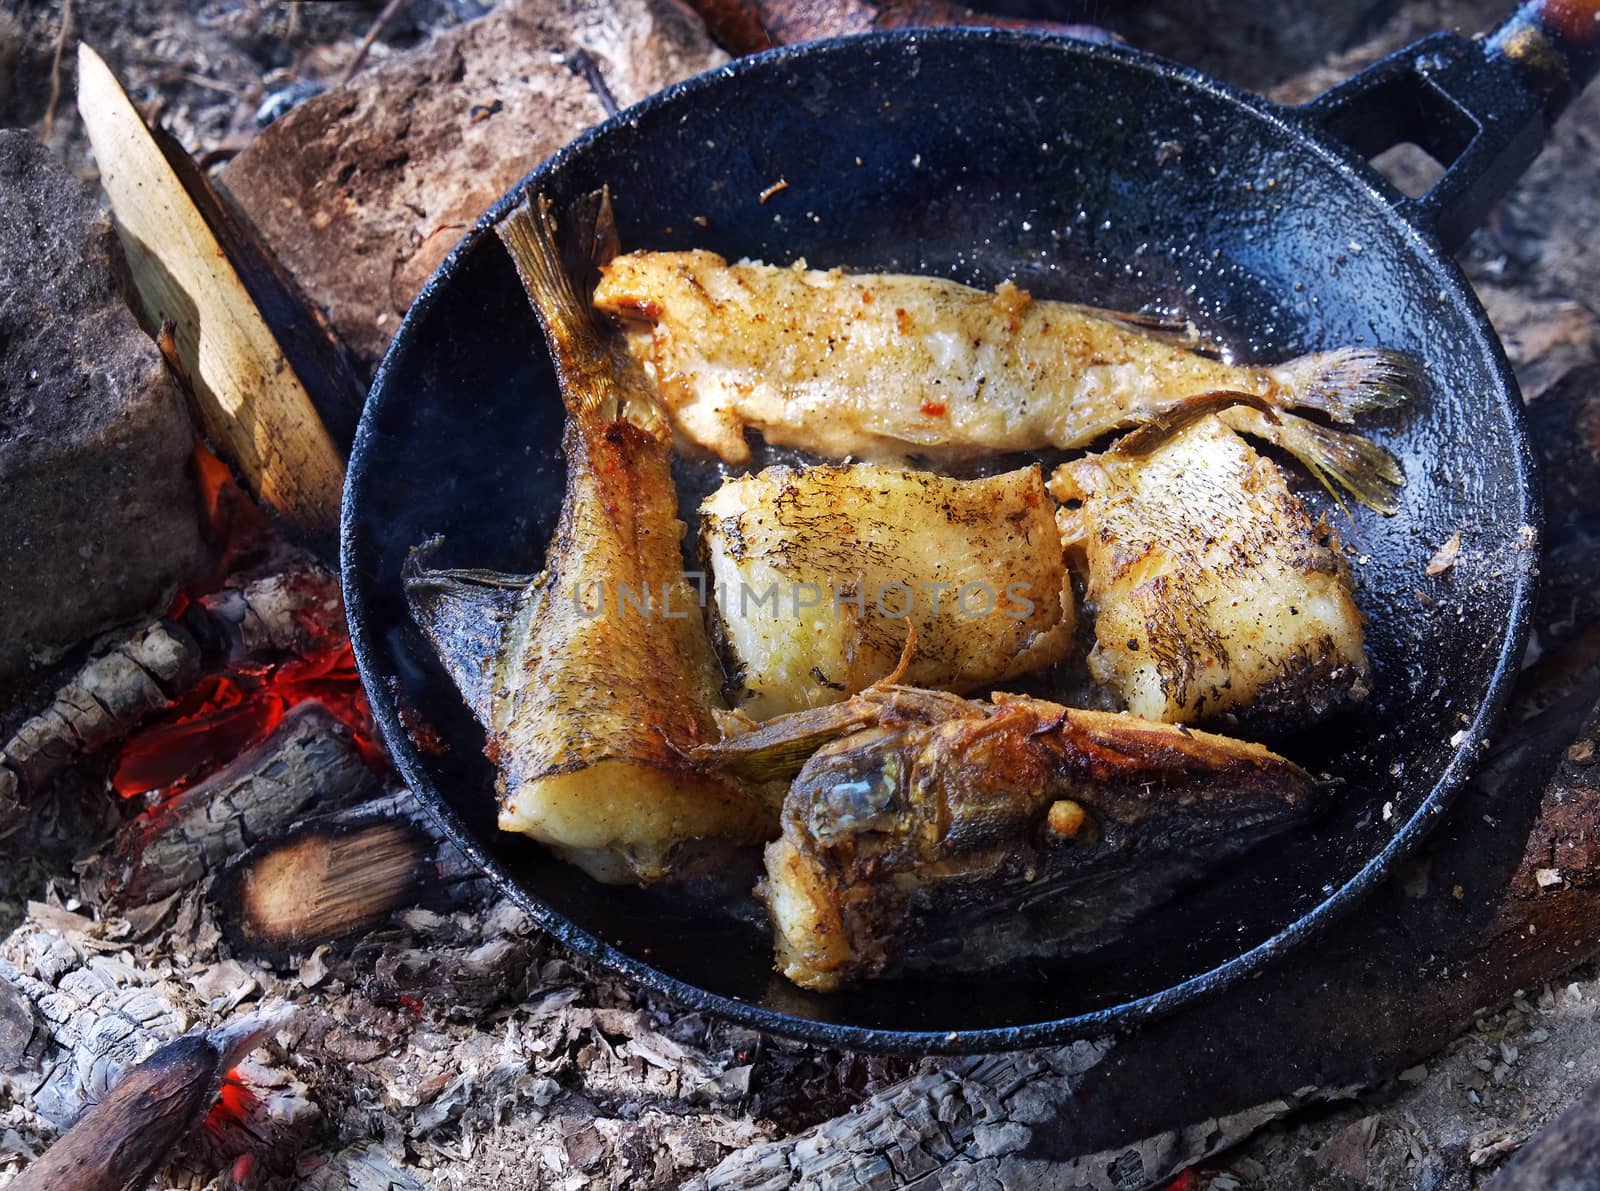 Fried river fish in a cast iron skillet on hot ashes from the fire outdoors.